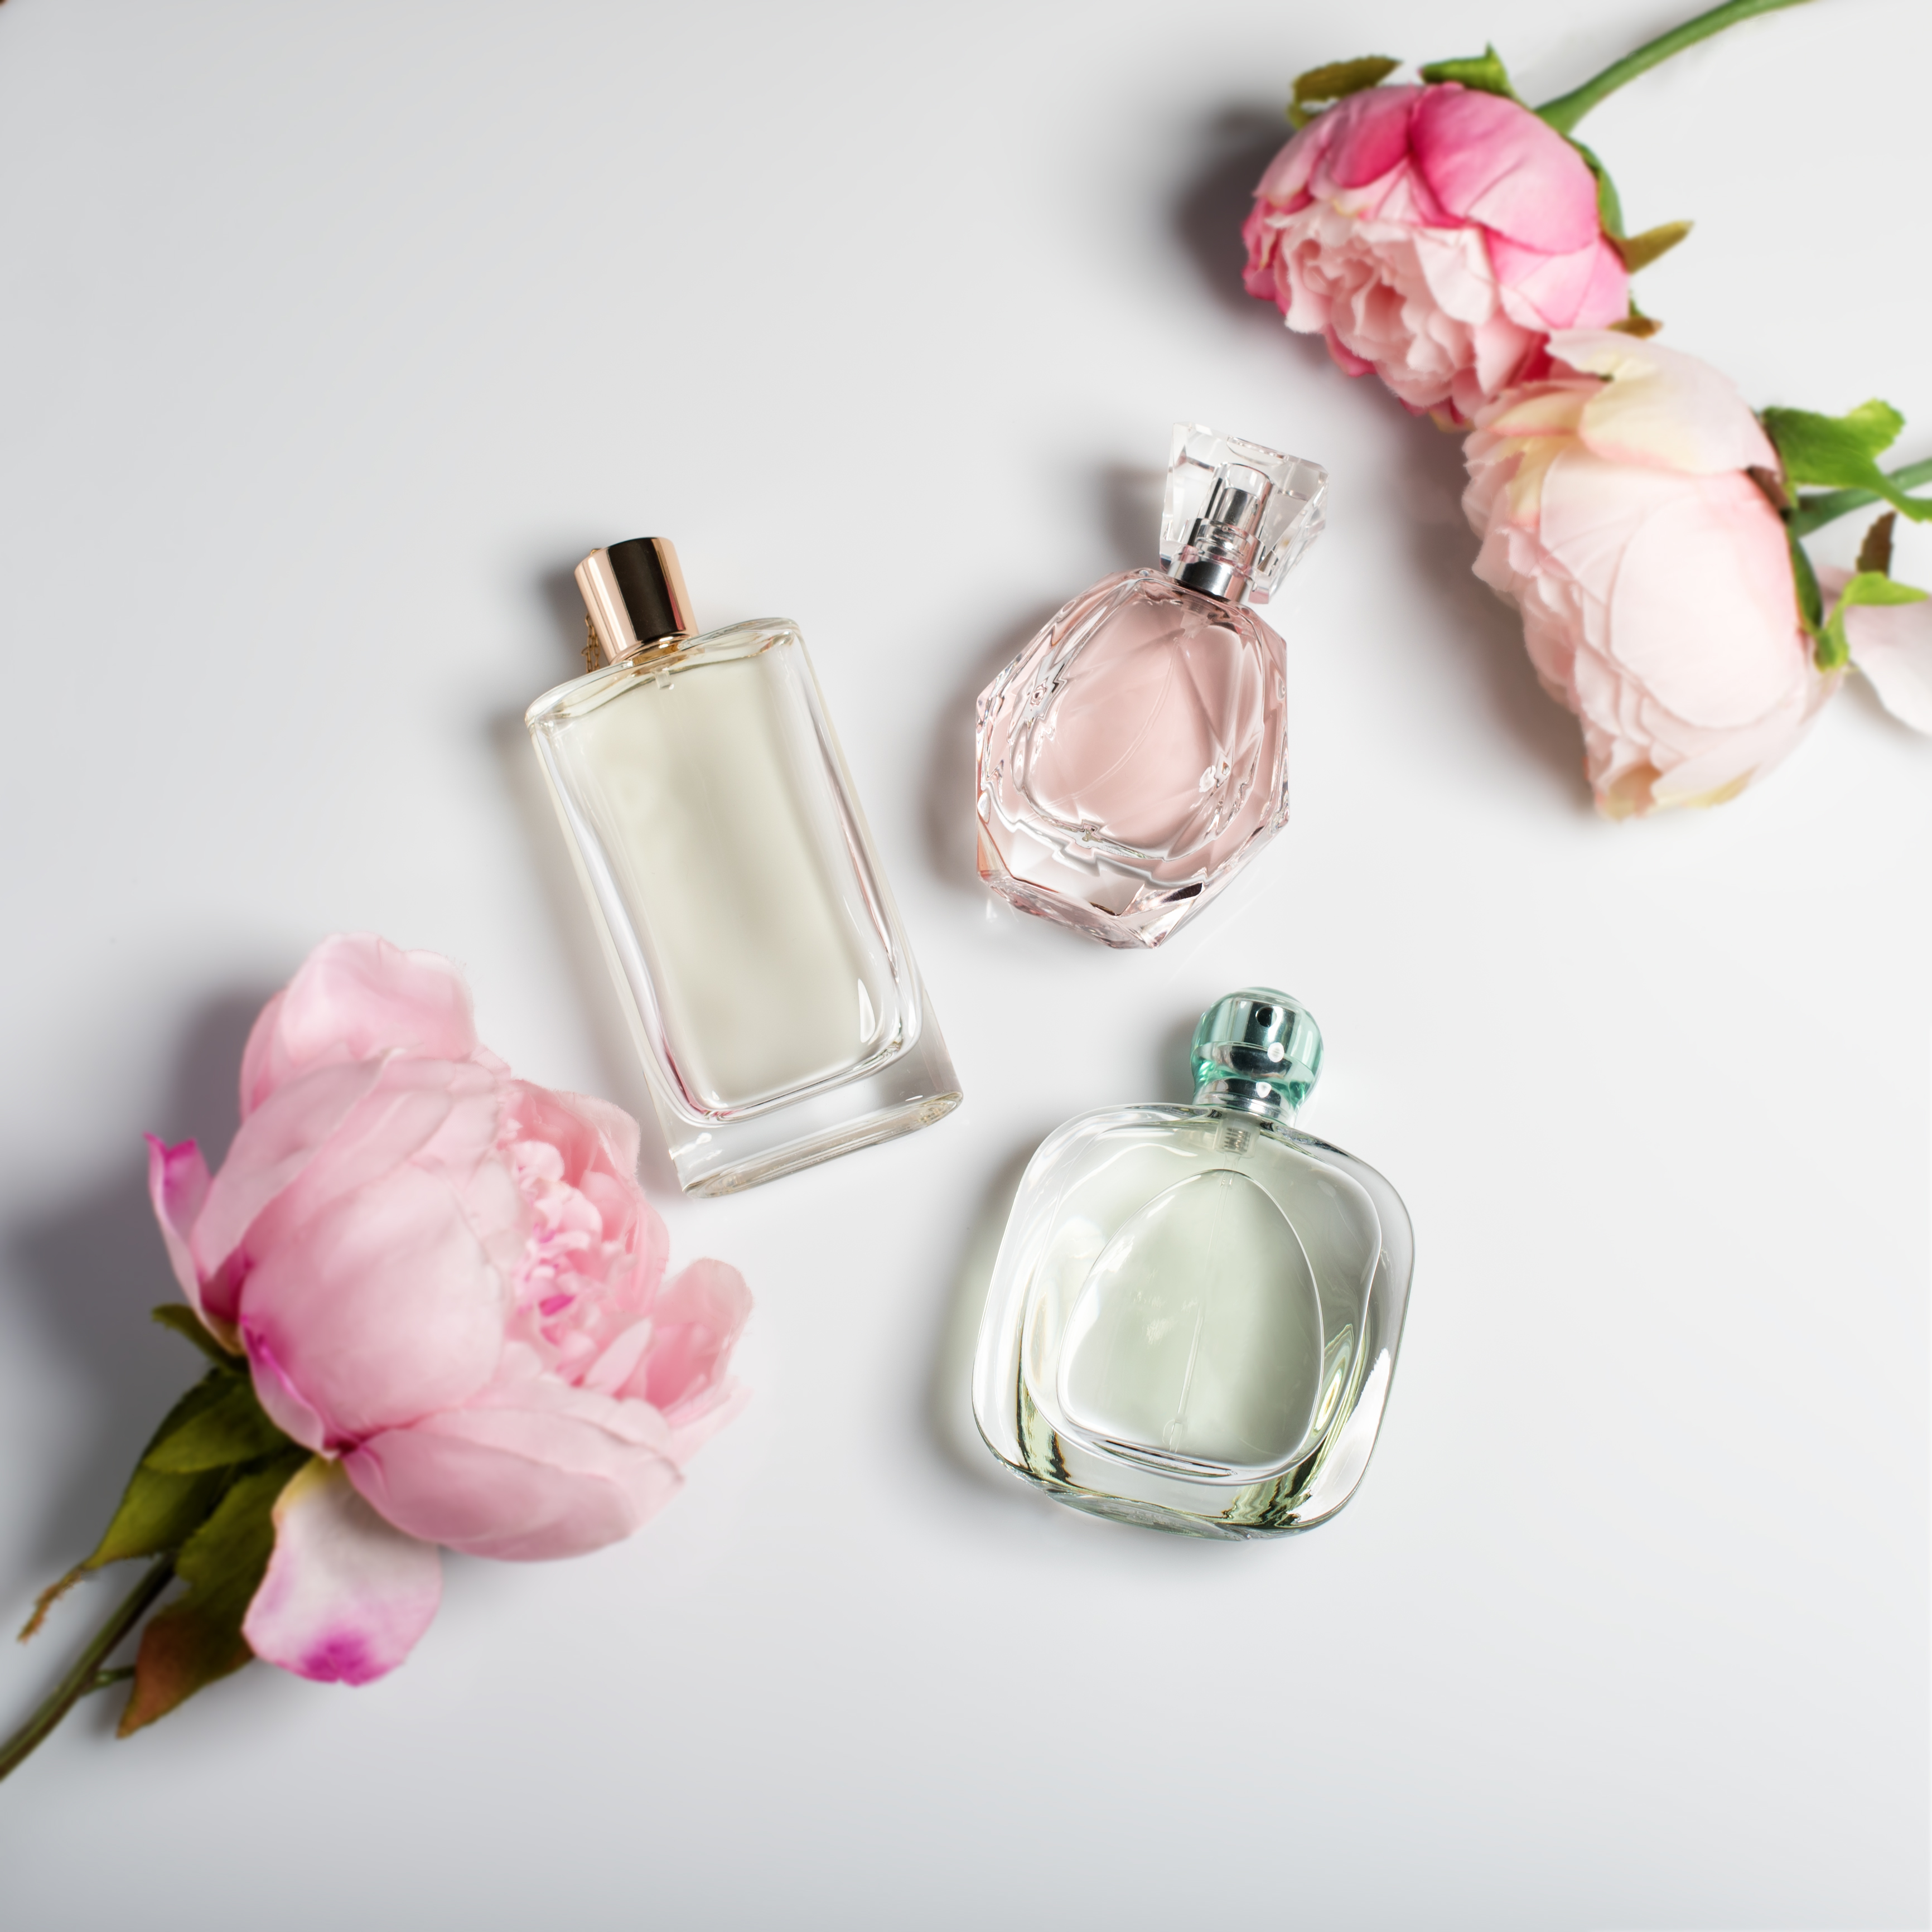 CVS: Save 40% on all perfume & cologne with coupon, free shipping